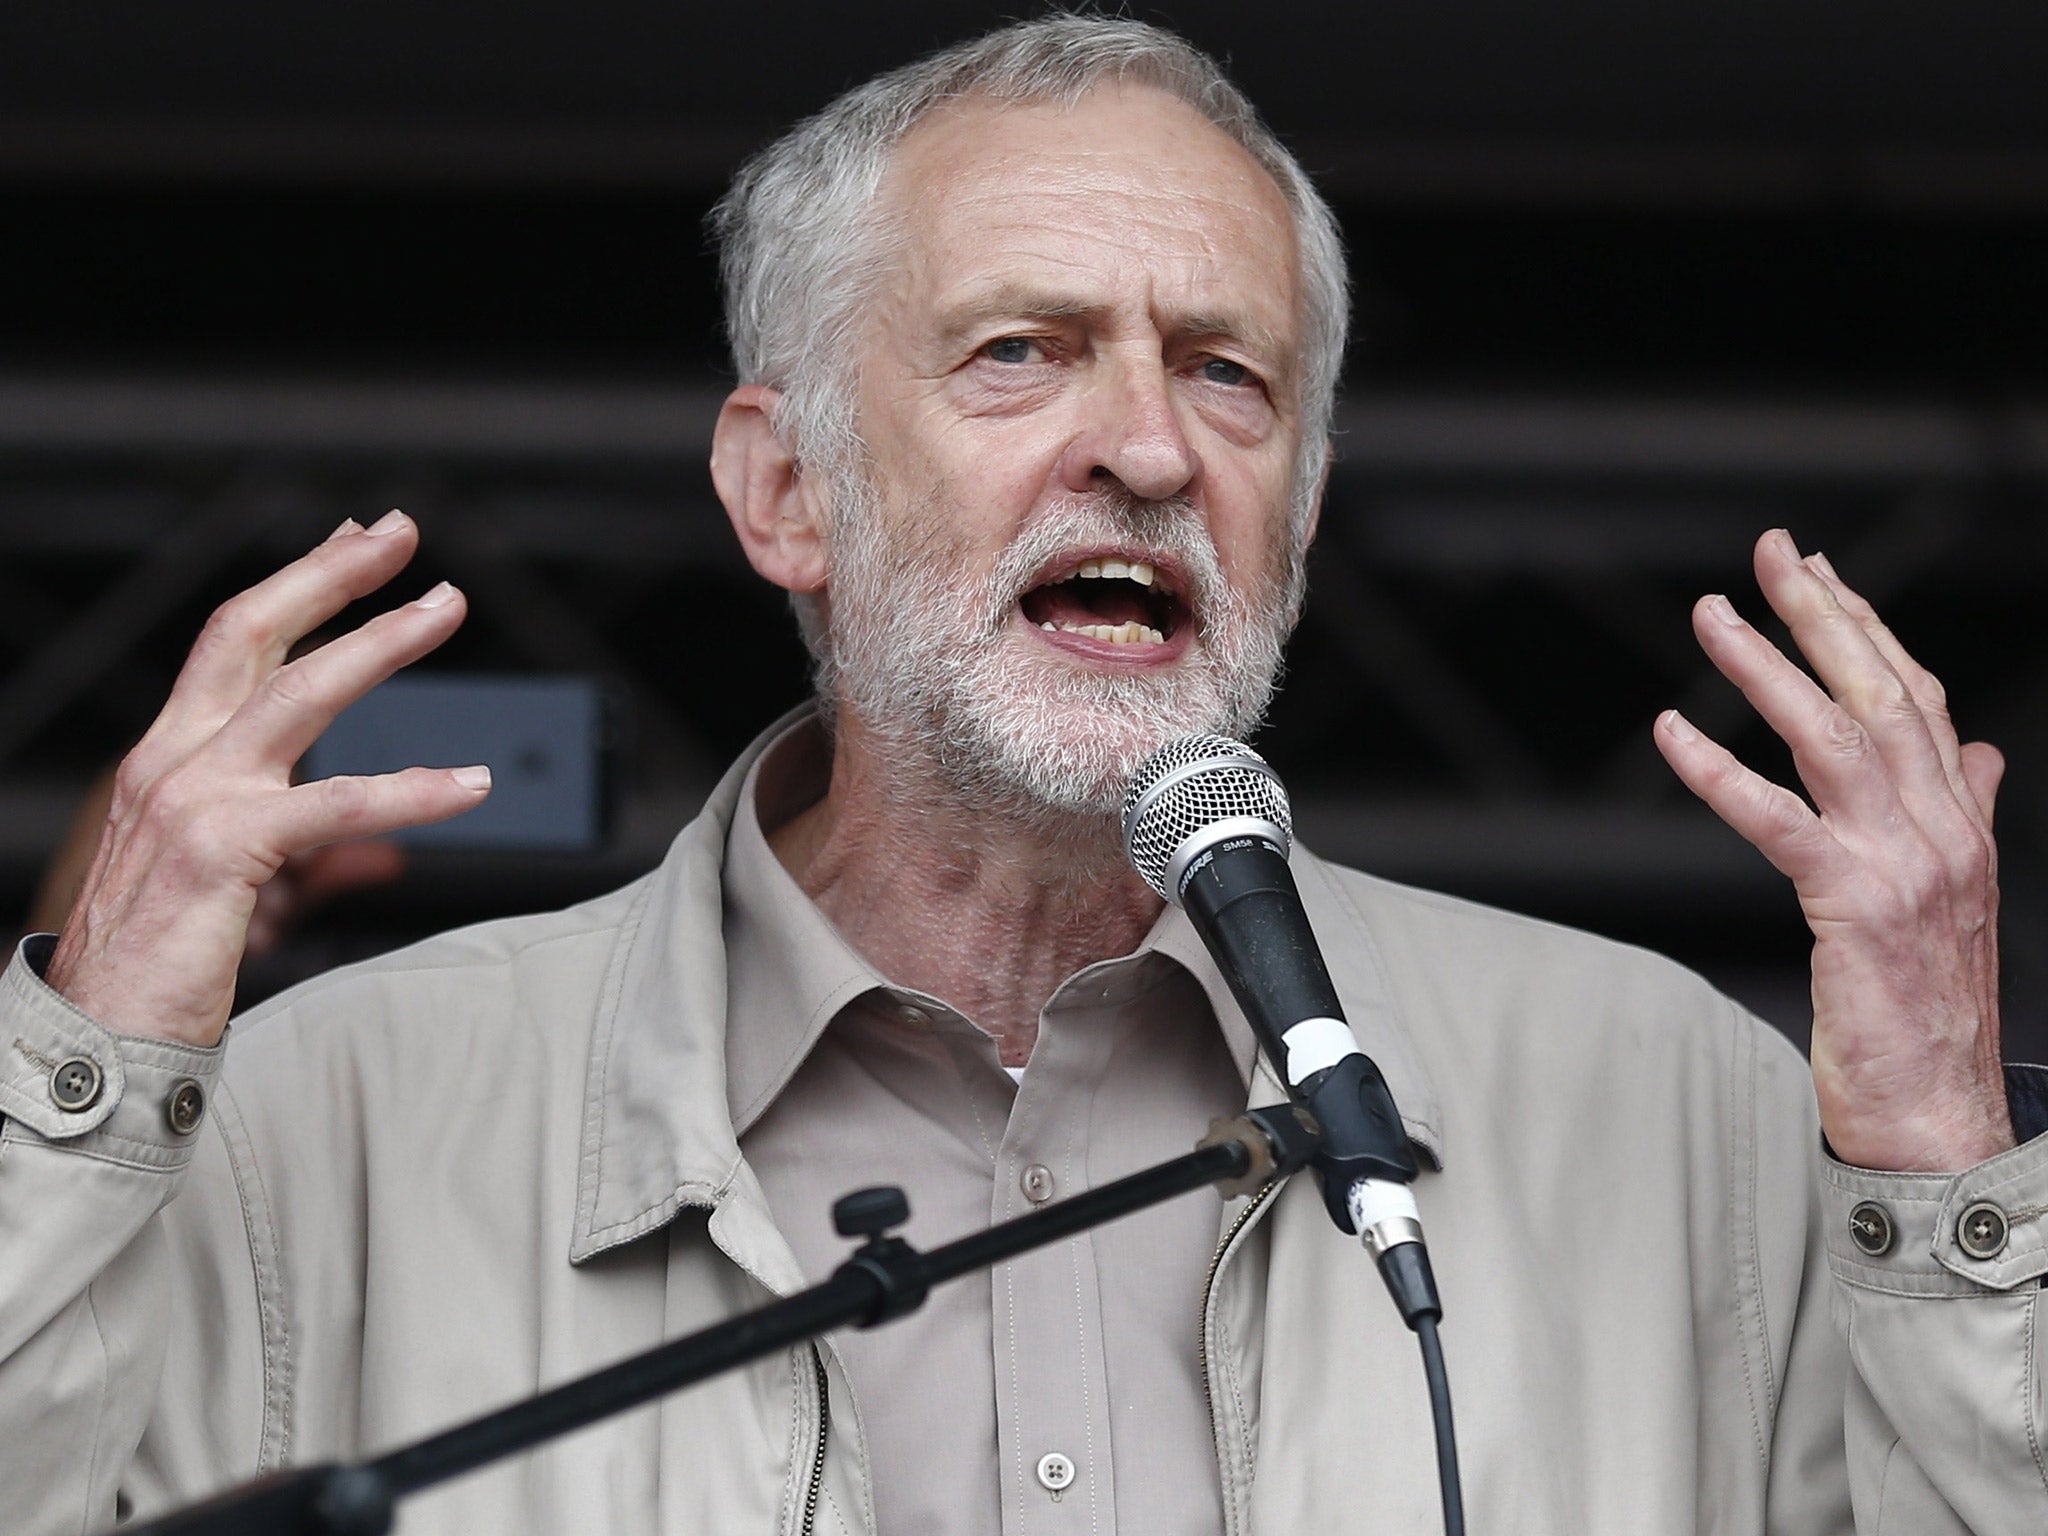 Labour MPs are pressing the Corbyn leadership to allow a free vote on Trident renewal